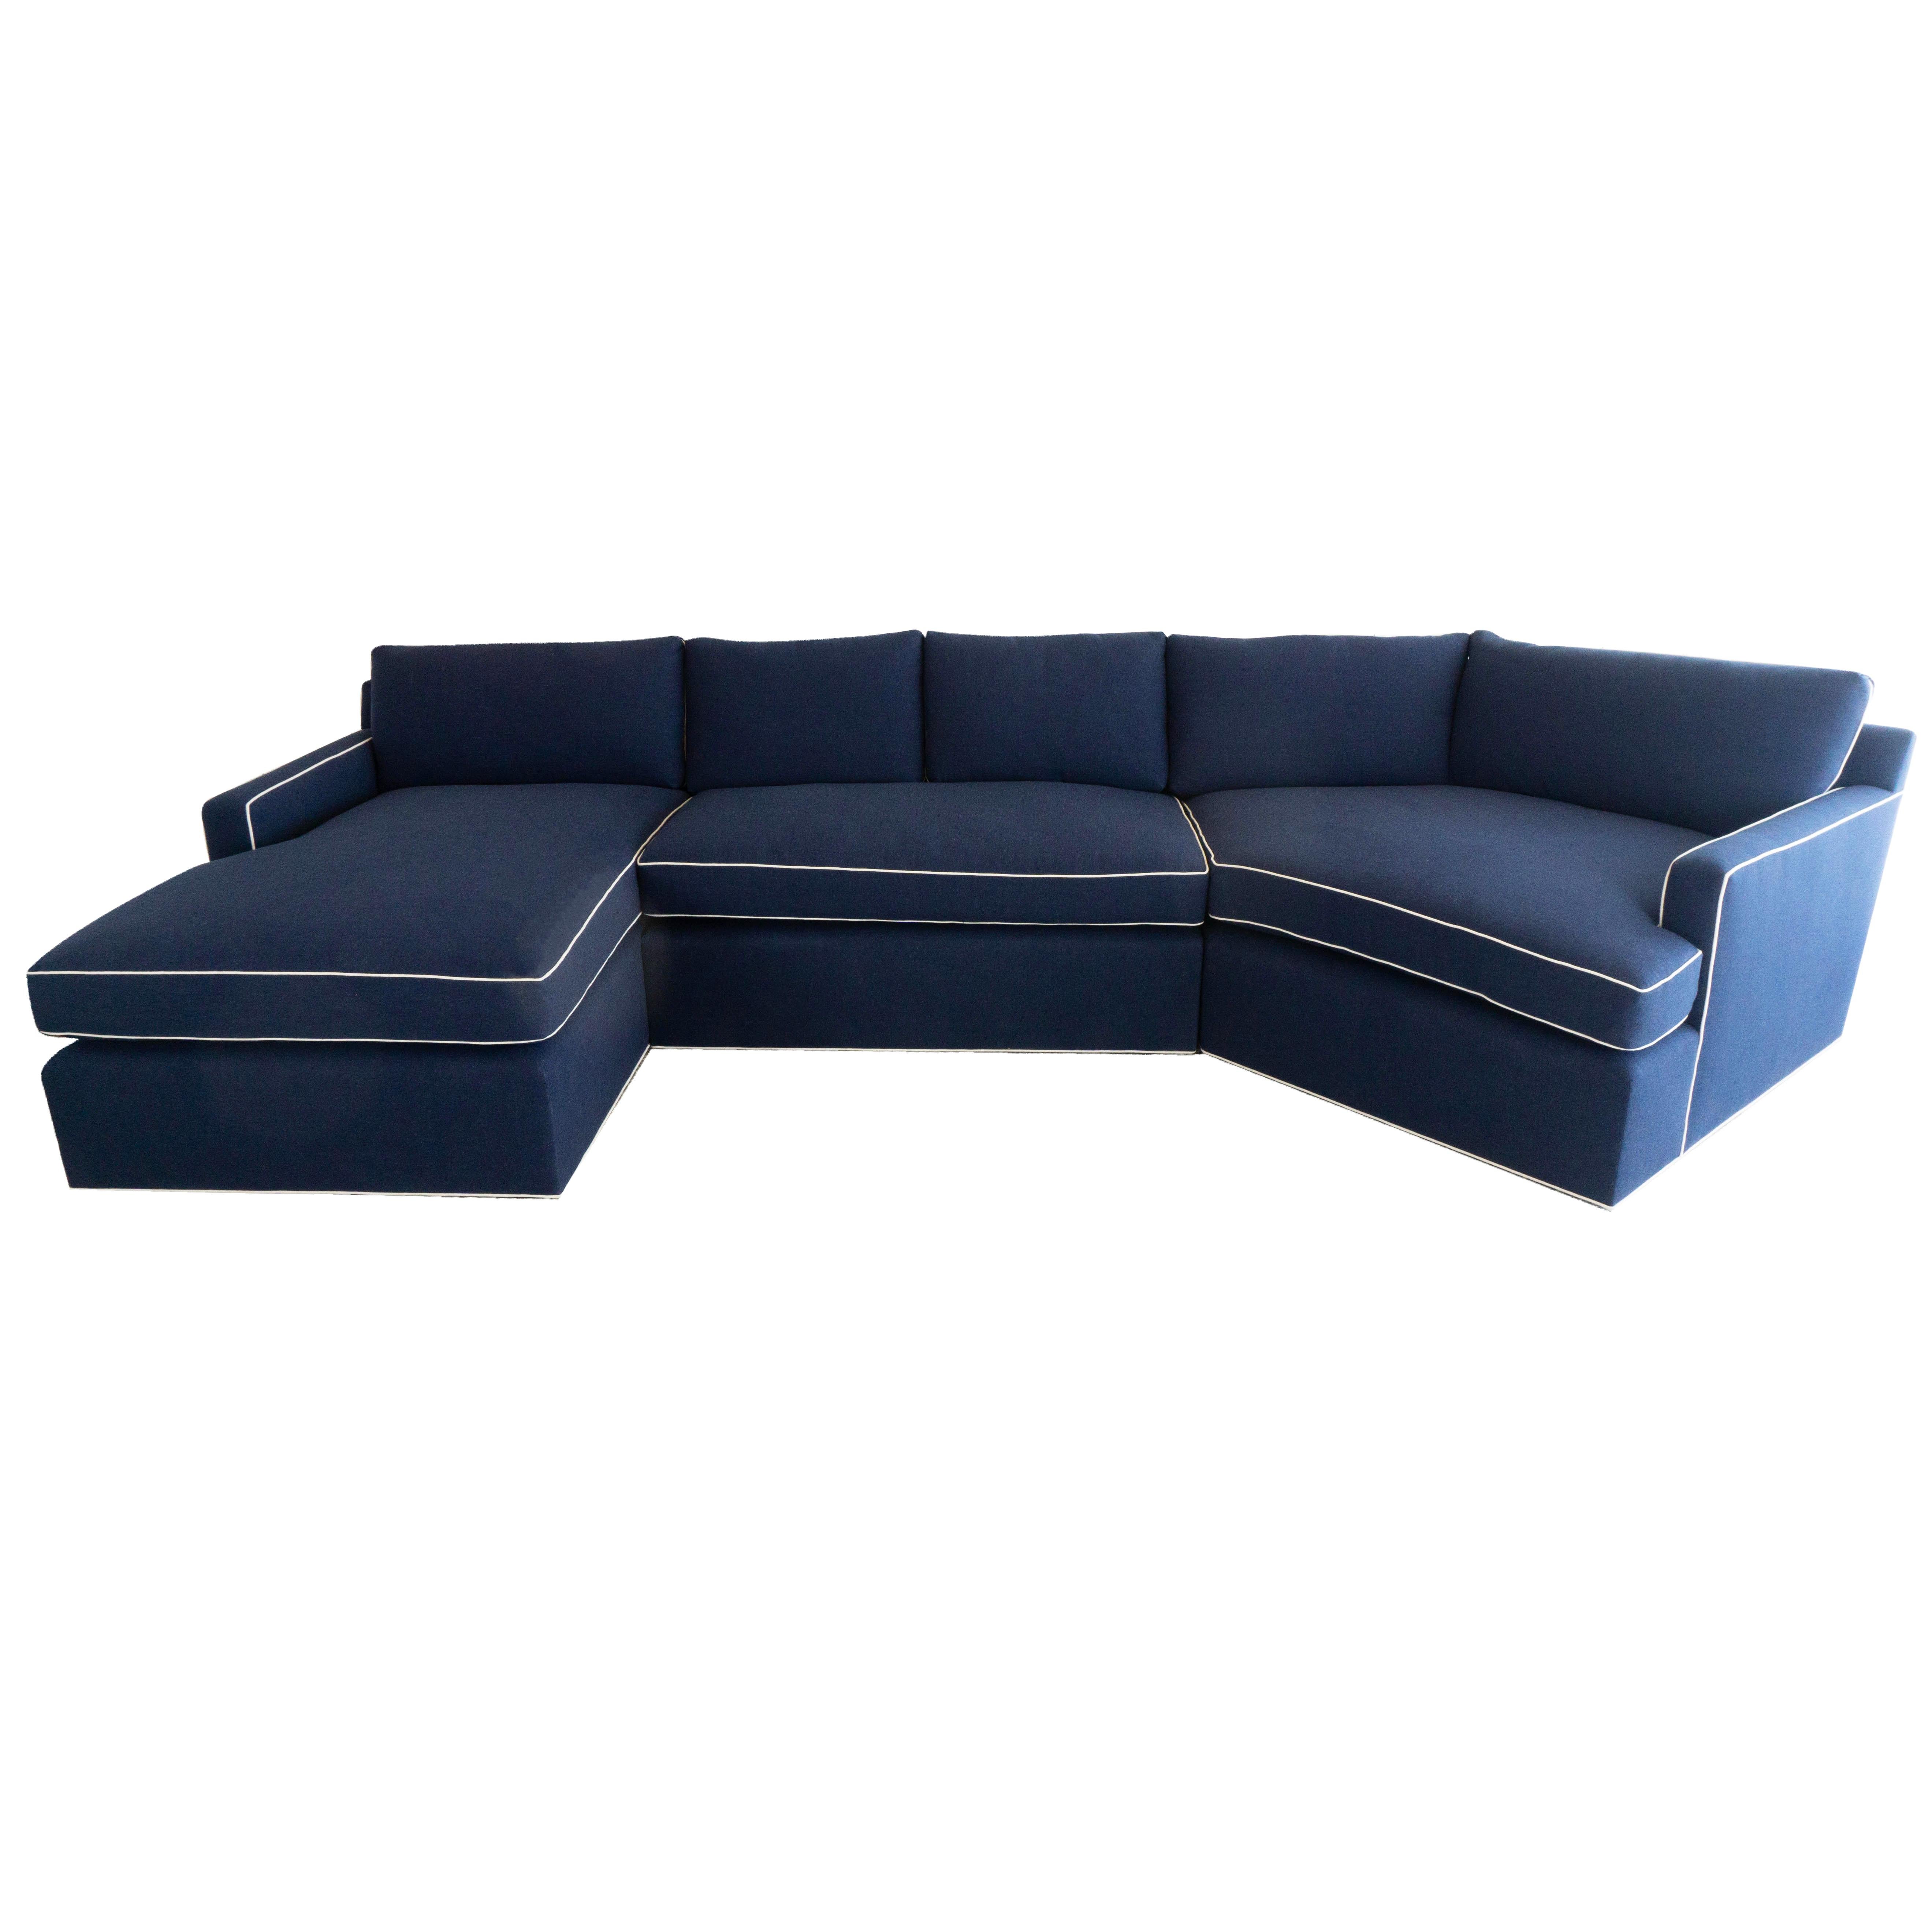 Large Custom Sectional Sofa with Chaise Lounge For Sale at 1stDibs | chaise  lounge sofa, chaise lounge sectional, lounge sectional sofa